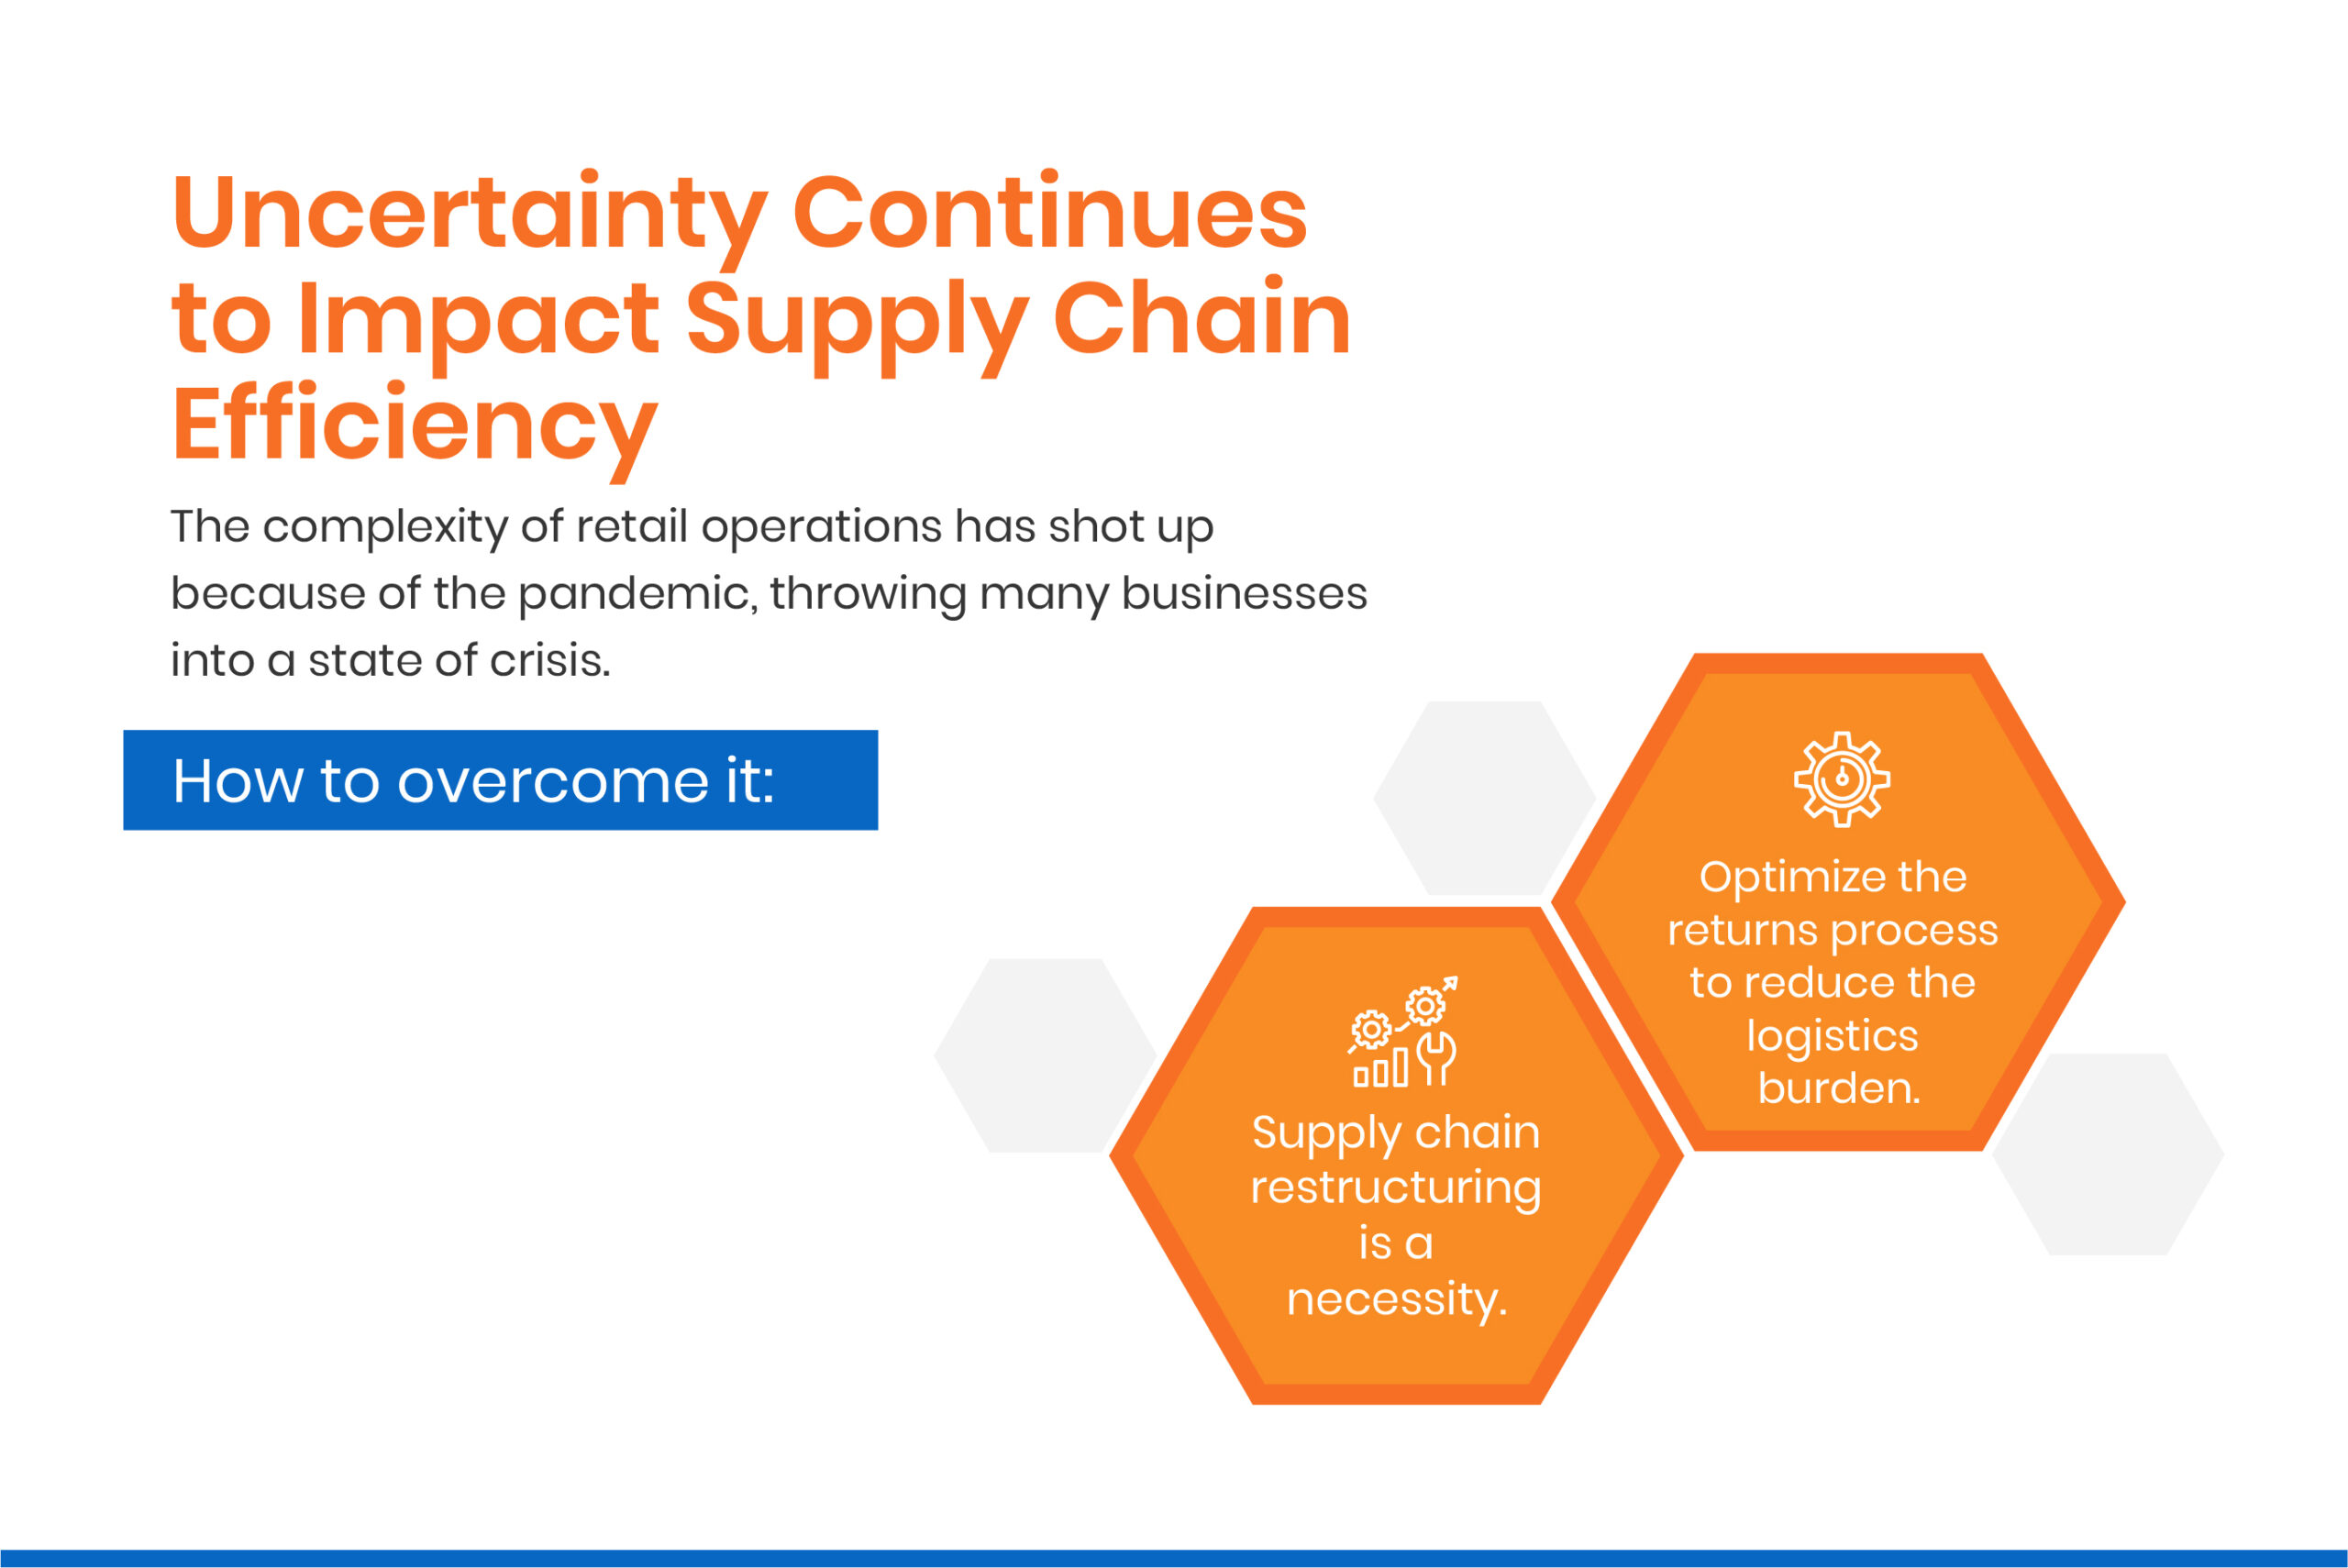 Challenge 3: Uncertainty Continues to Impact Supply Chain Efficiency